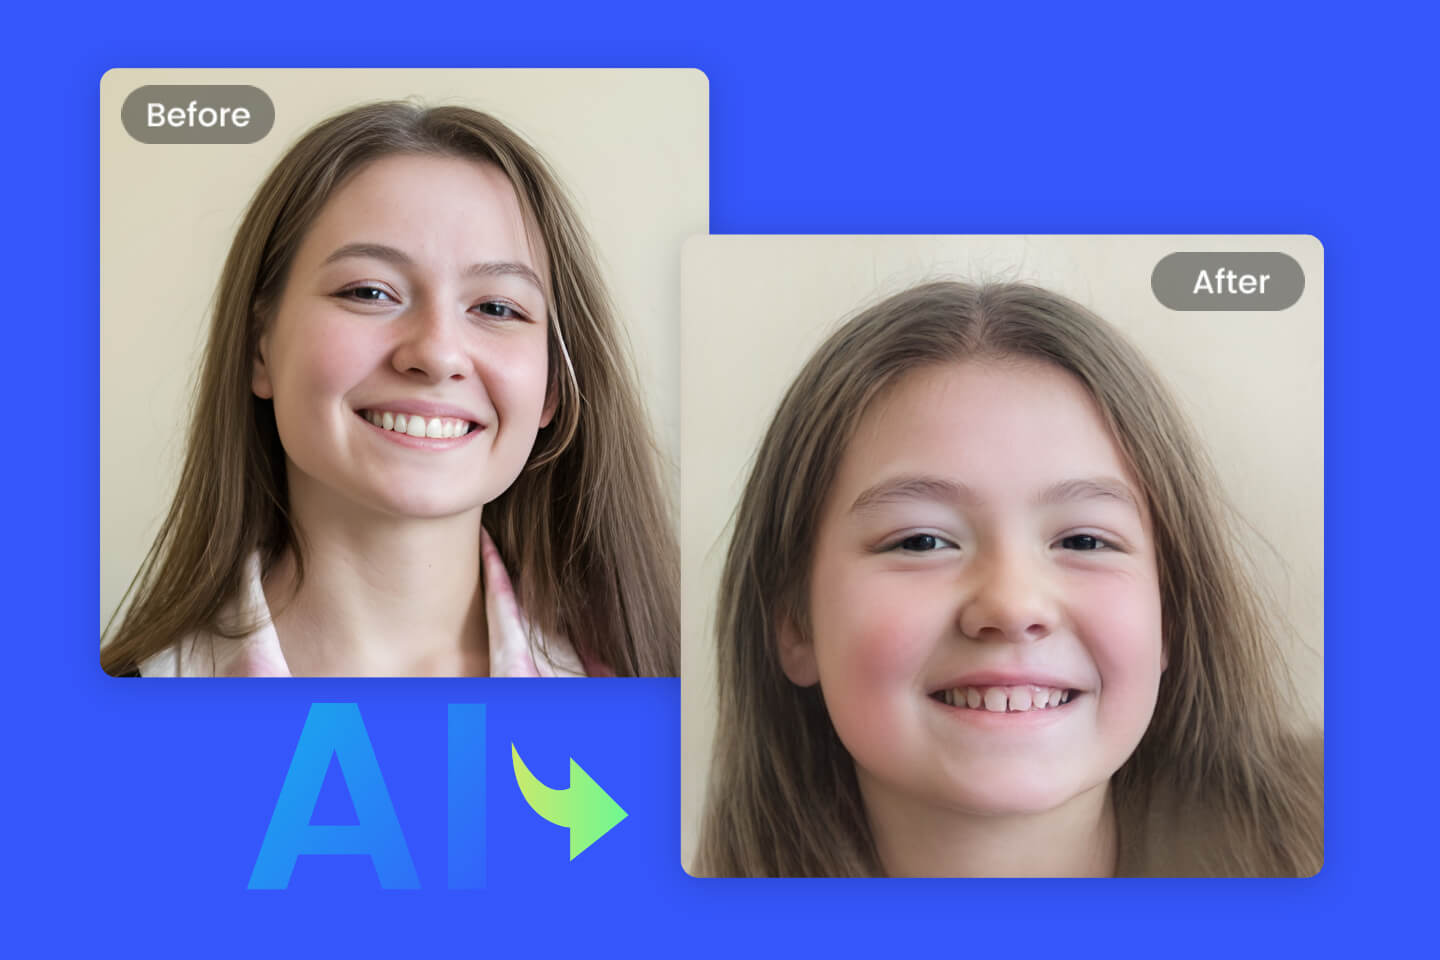 Some AI Faces Look More Real Than Actual Human Faces